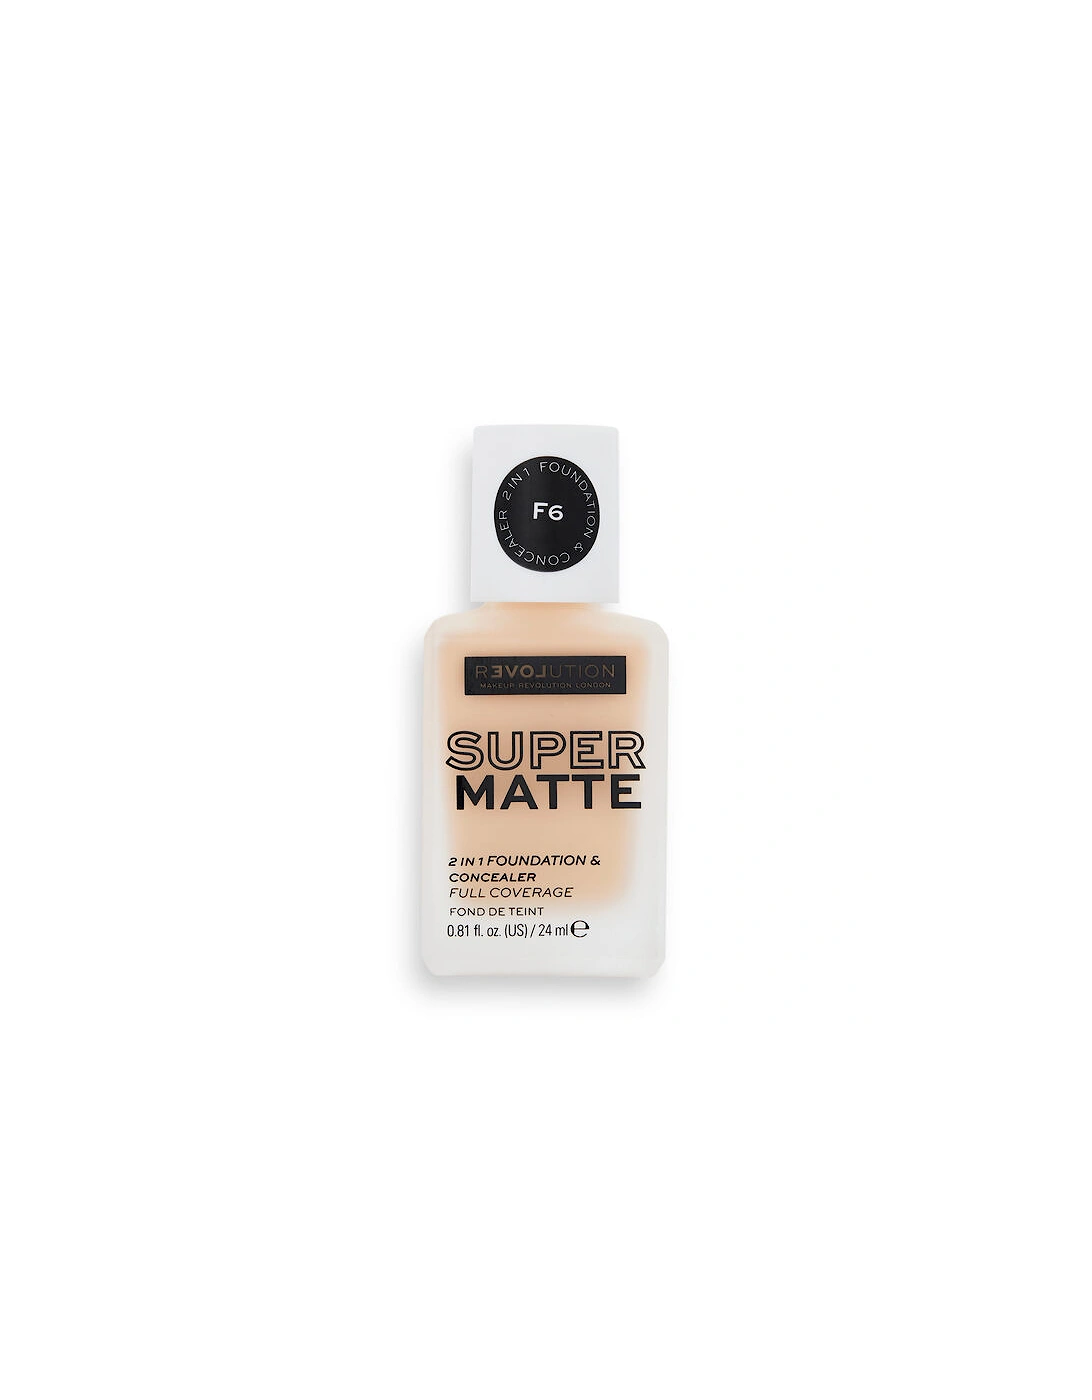 Relove by Supermatte Foundation F6, 2 of 1